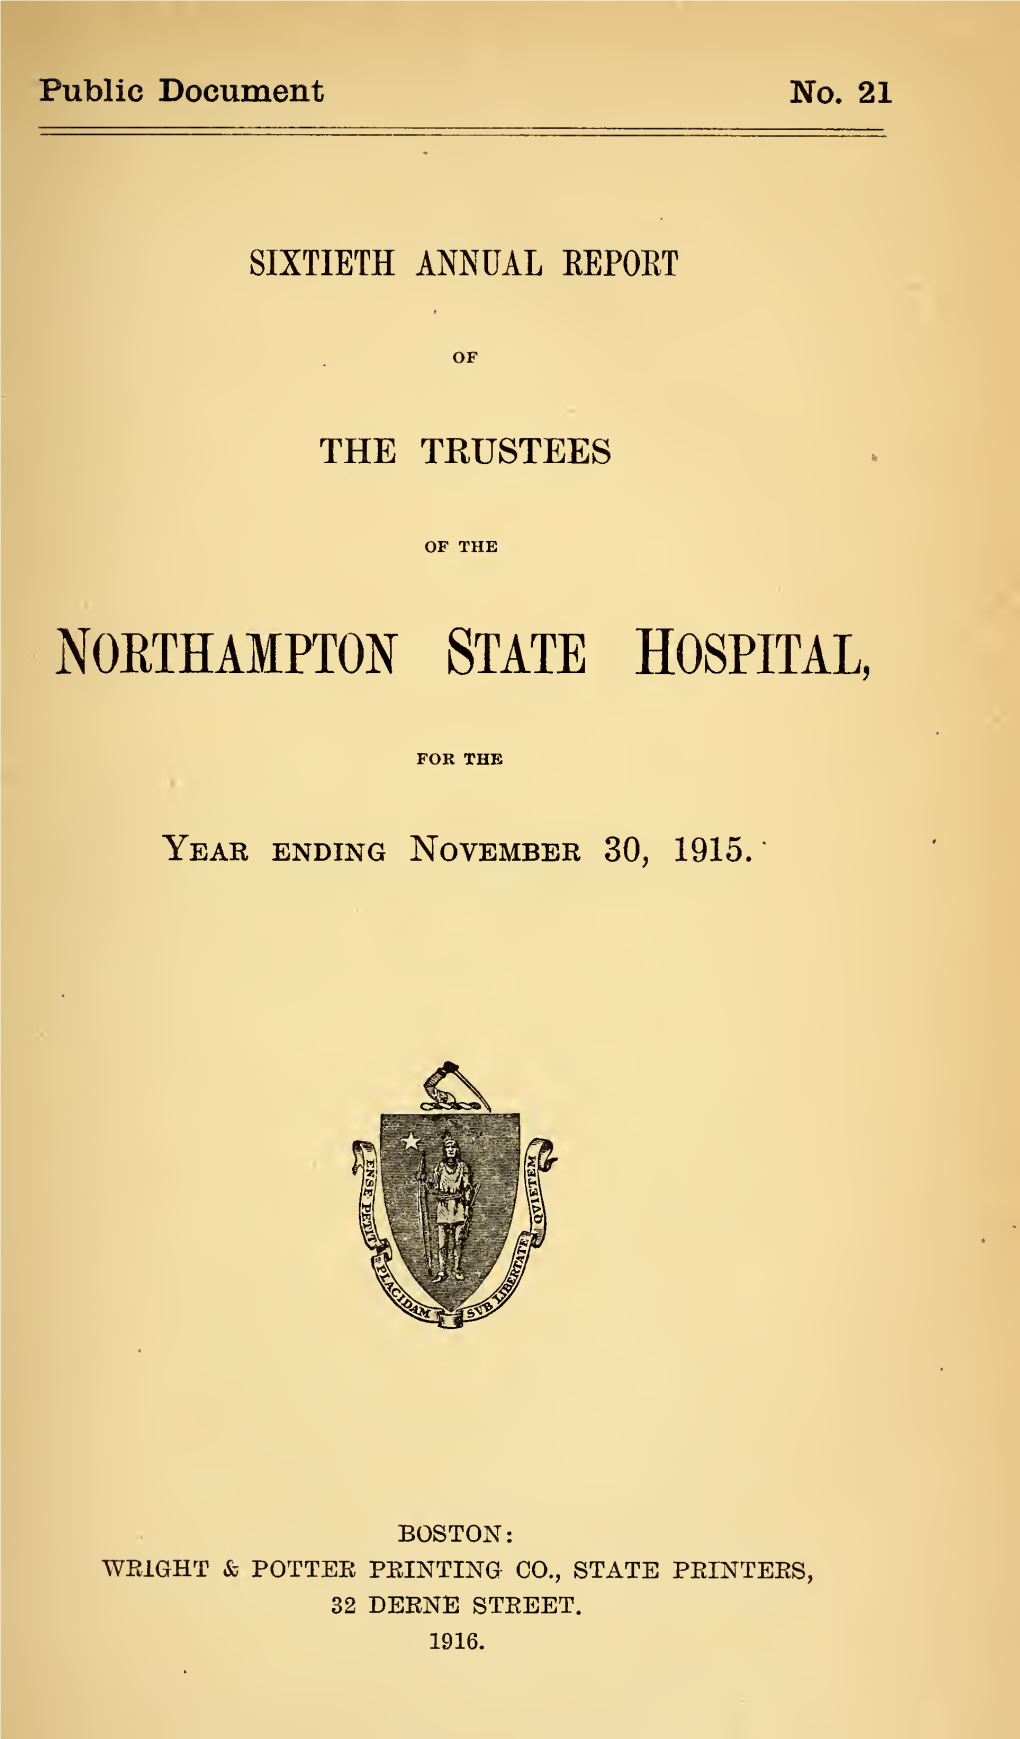 Annual Report of the Trustees of the Northampton State Hospital for the Year Ending